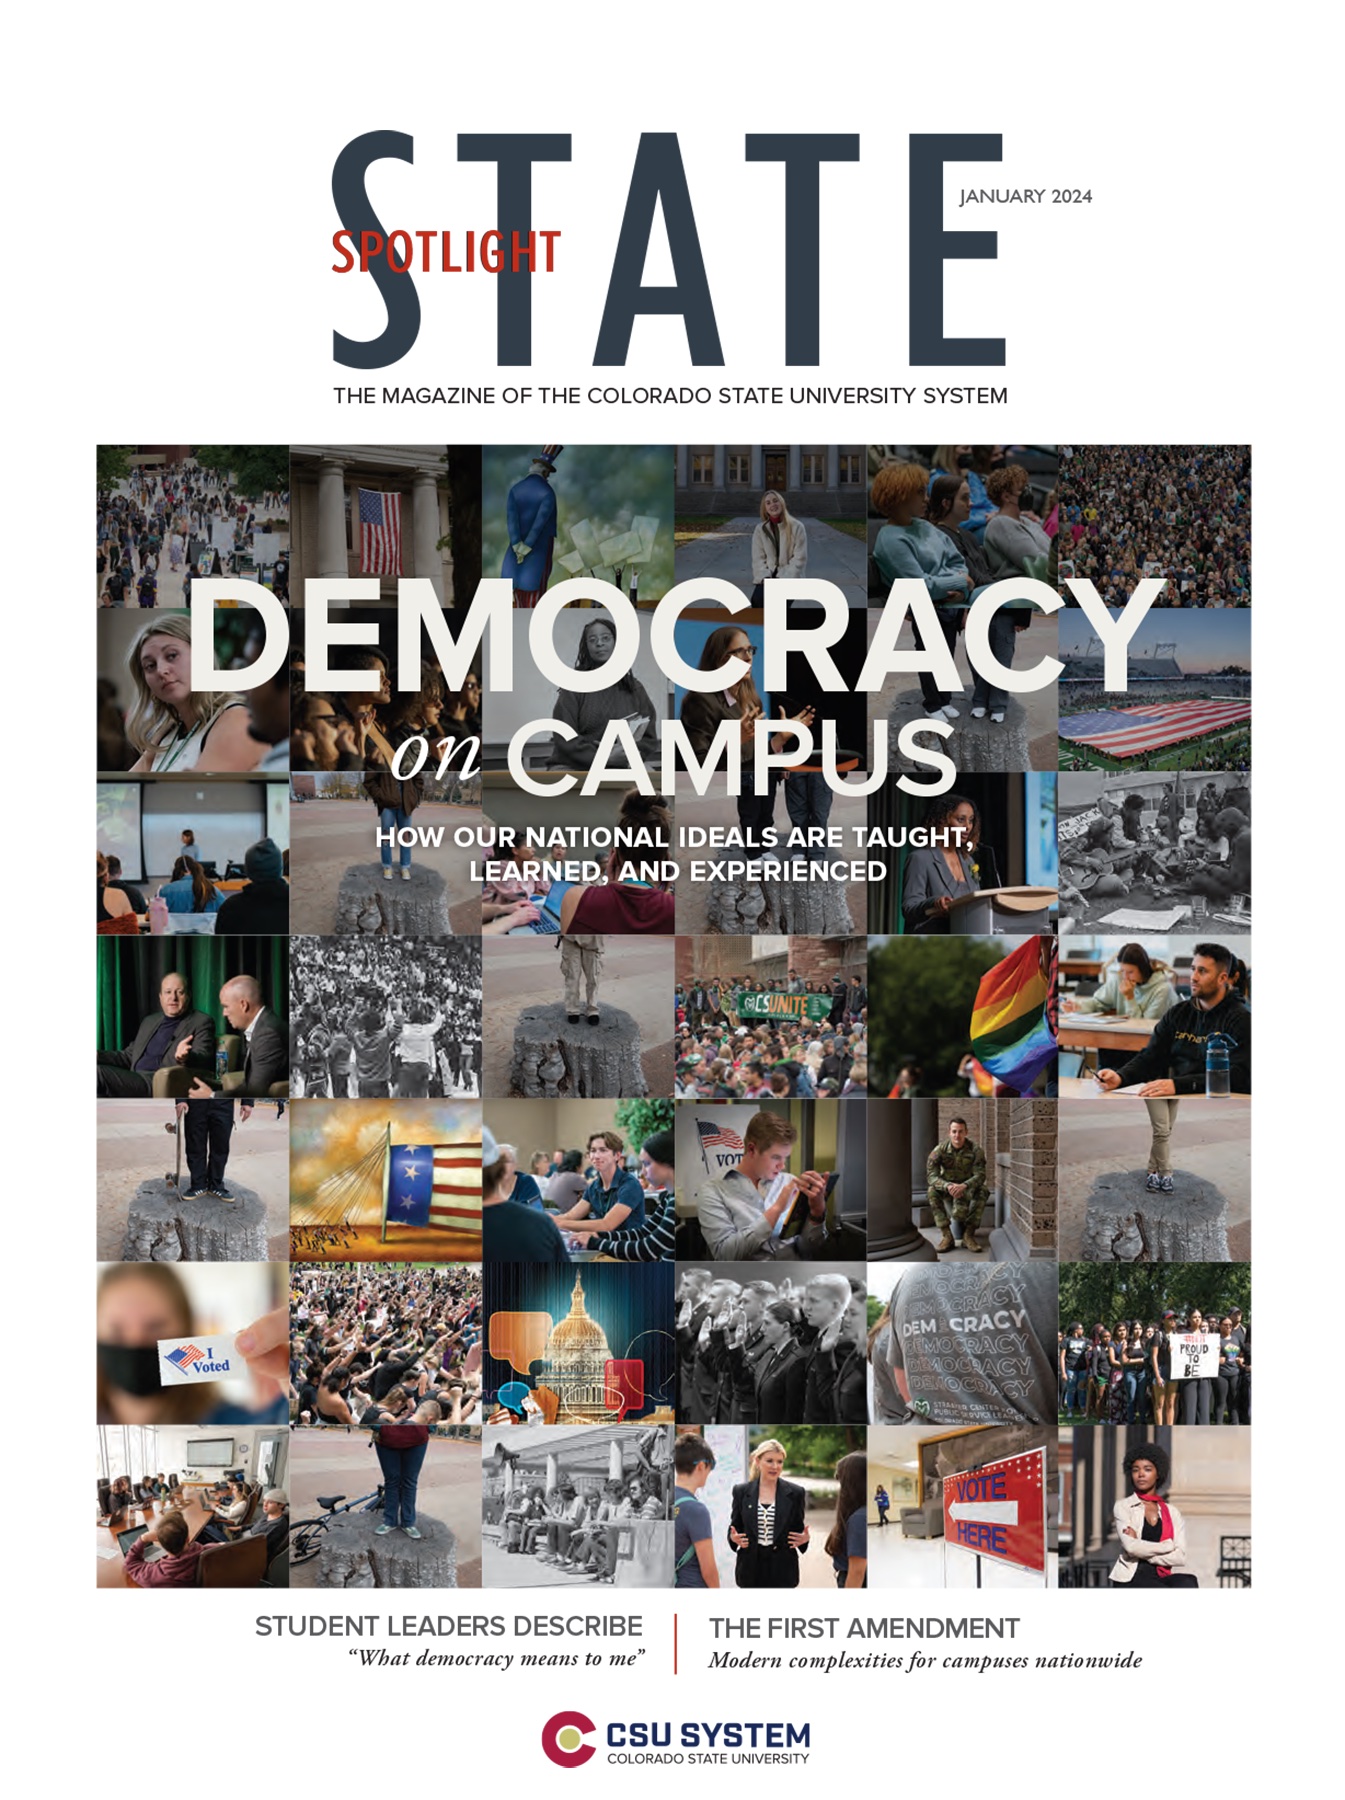 STATE magazine cover with the headline "Democracy on Campus."